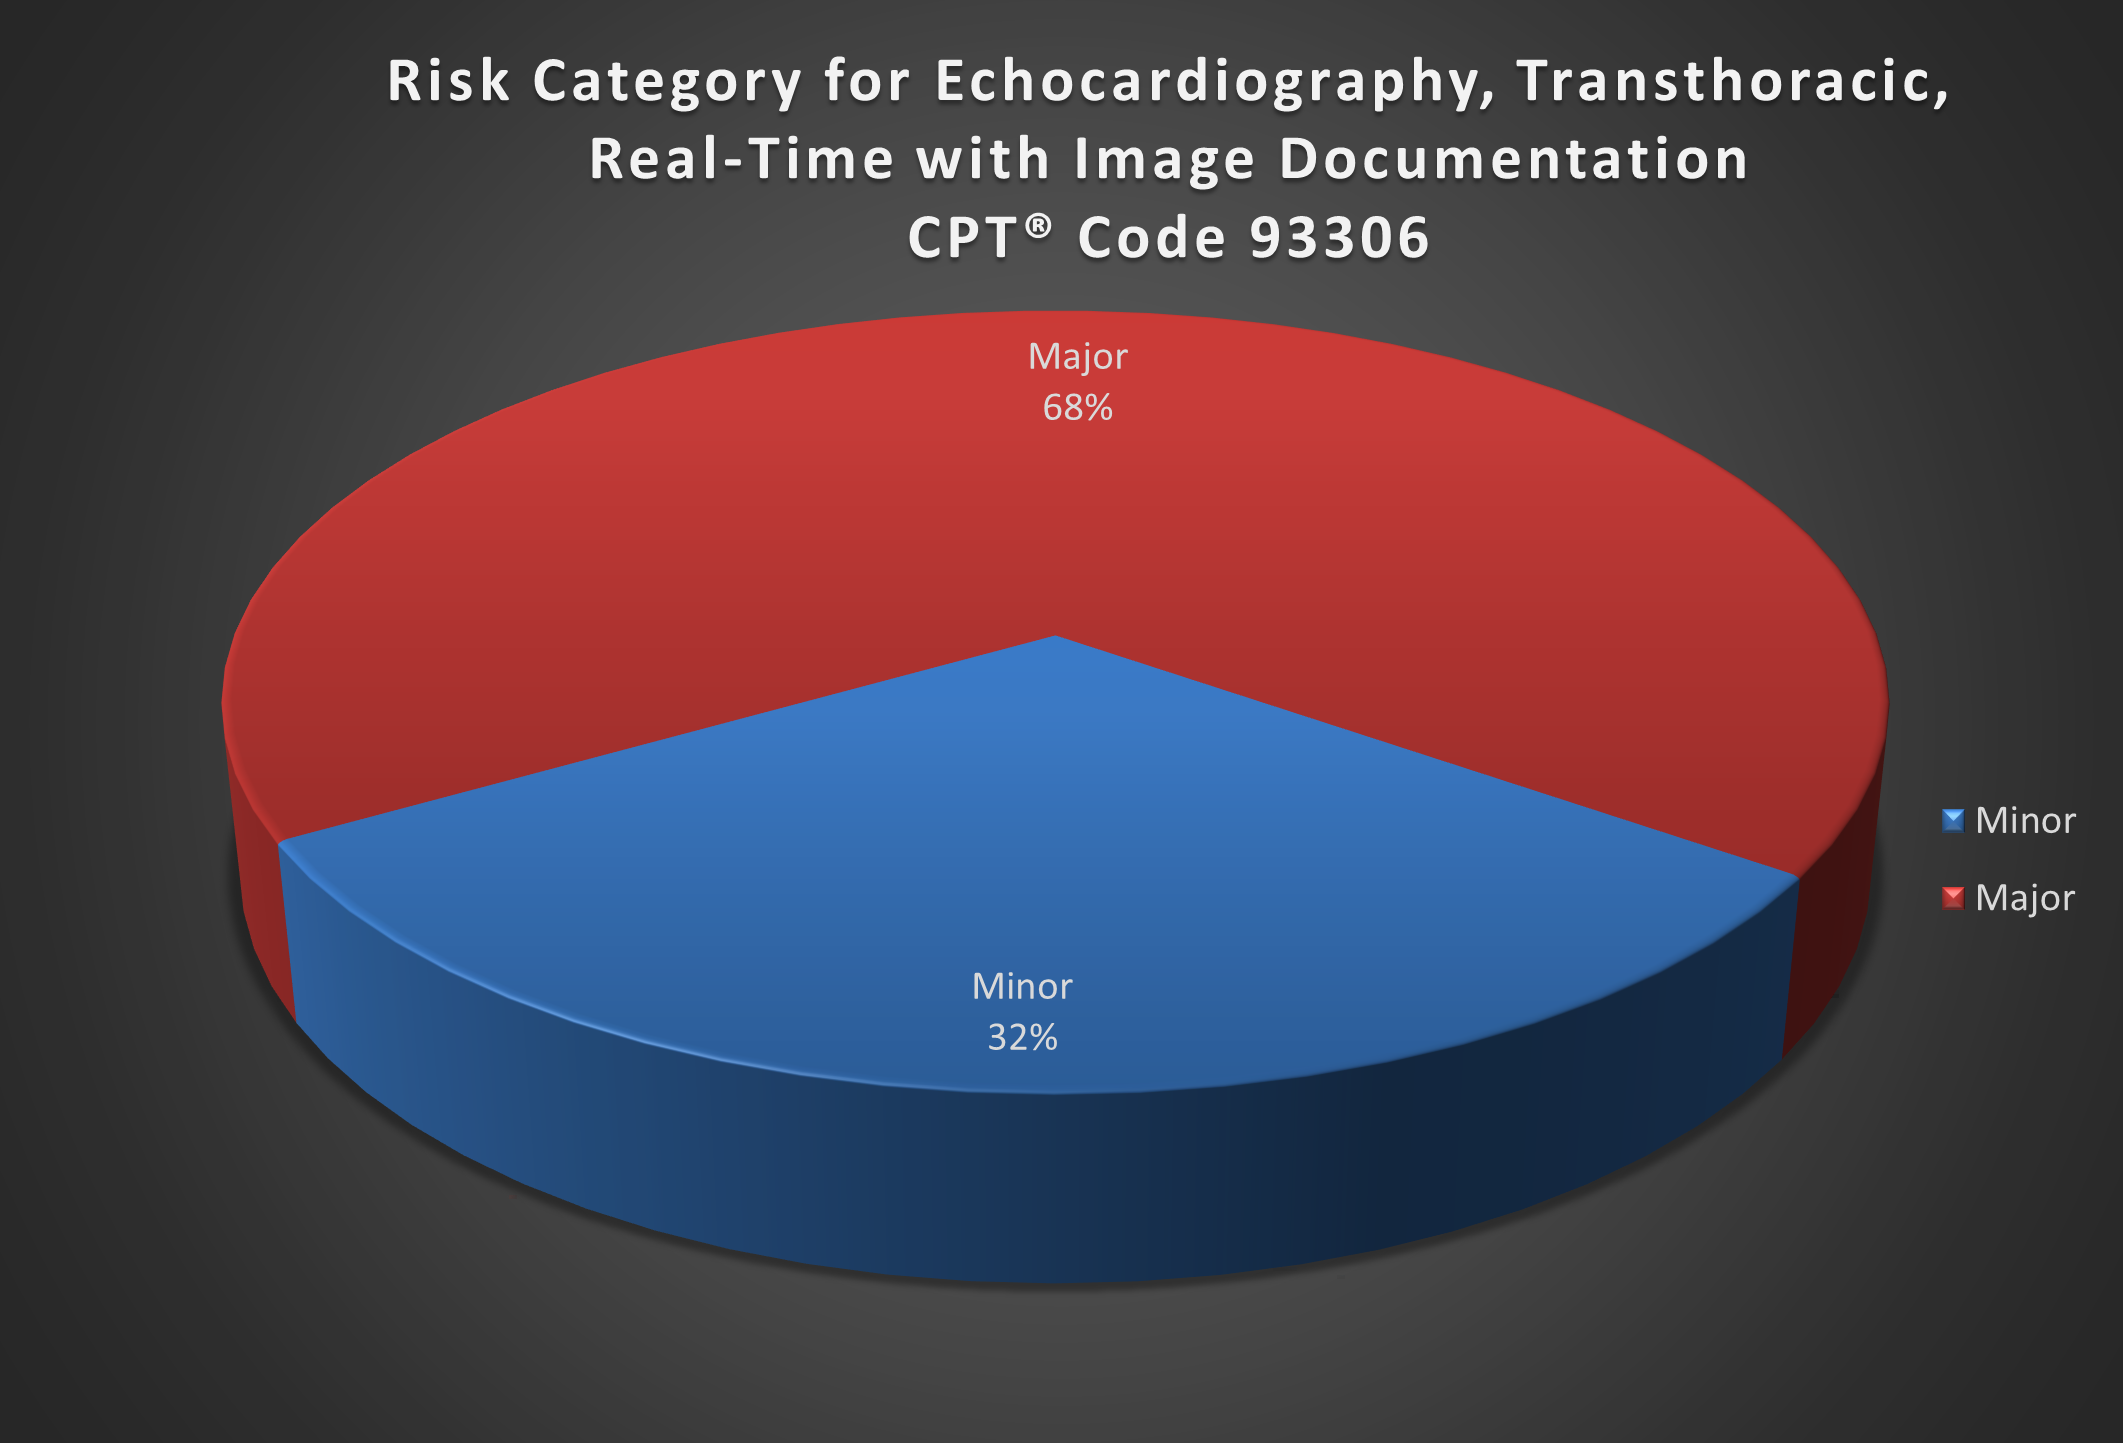 Risk Category for Echocardiography, Transthoracic, Real-Time with Image Documentation